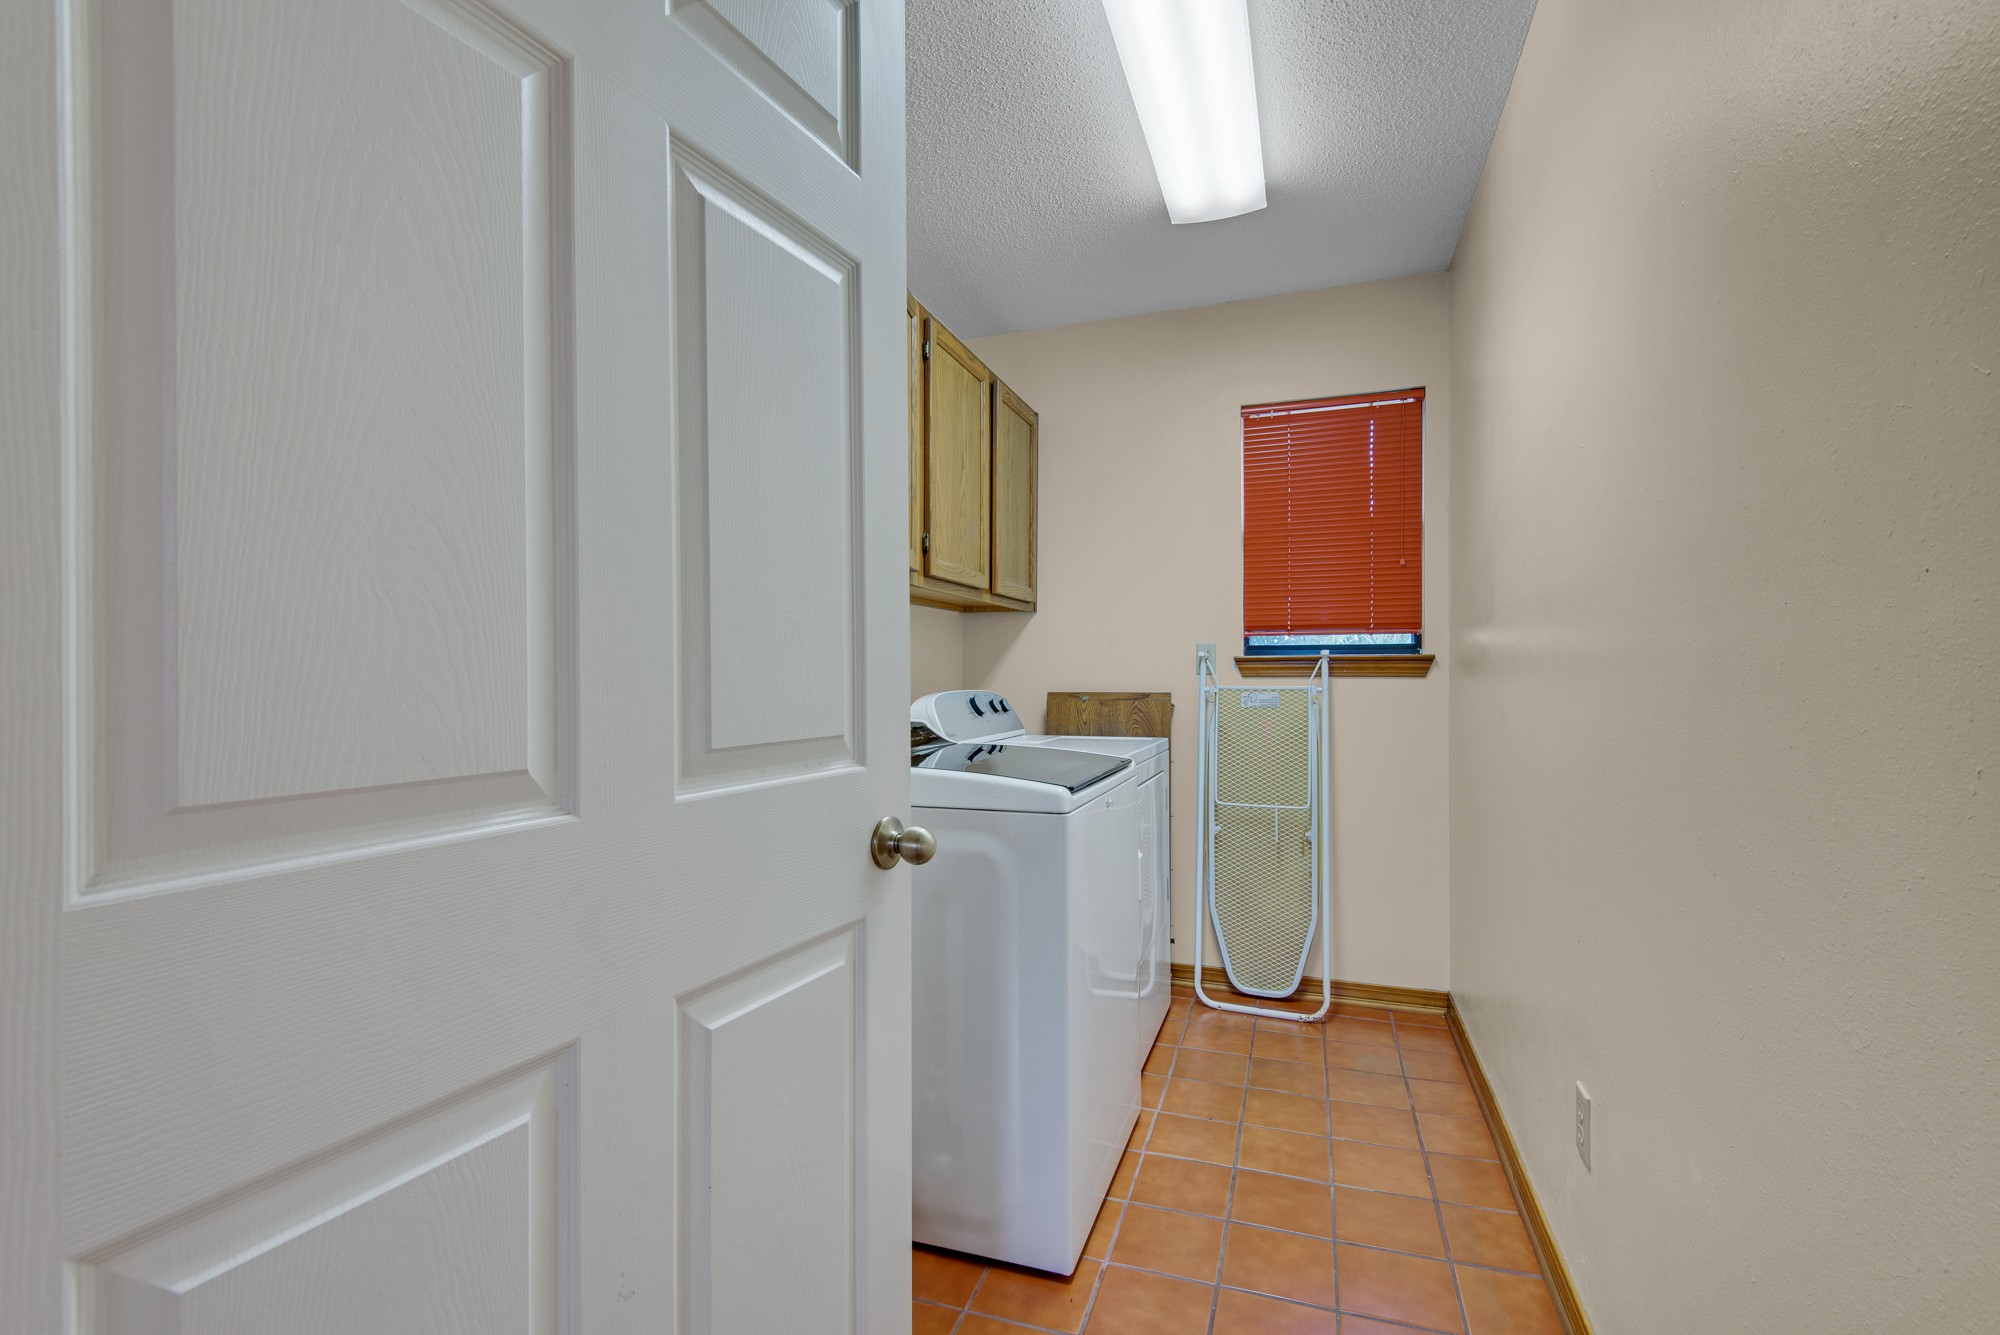 Washer & Dryer area